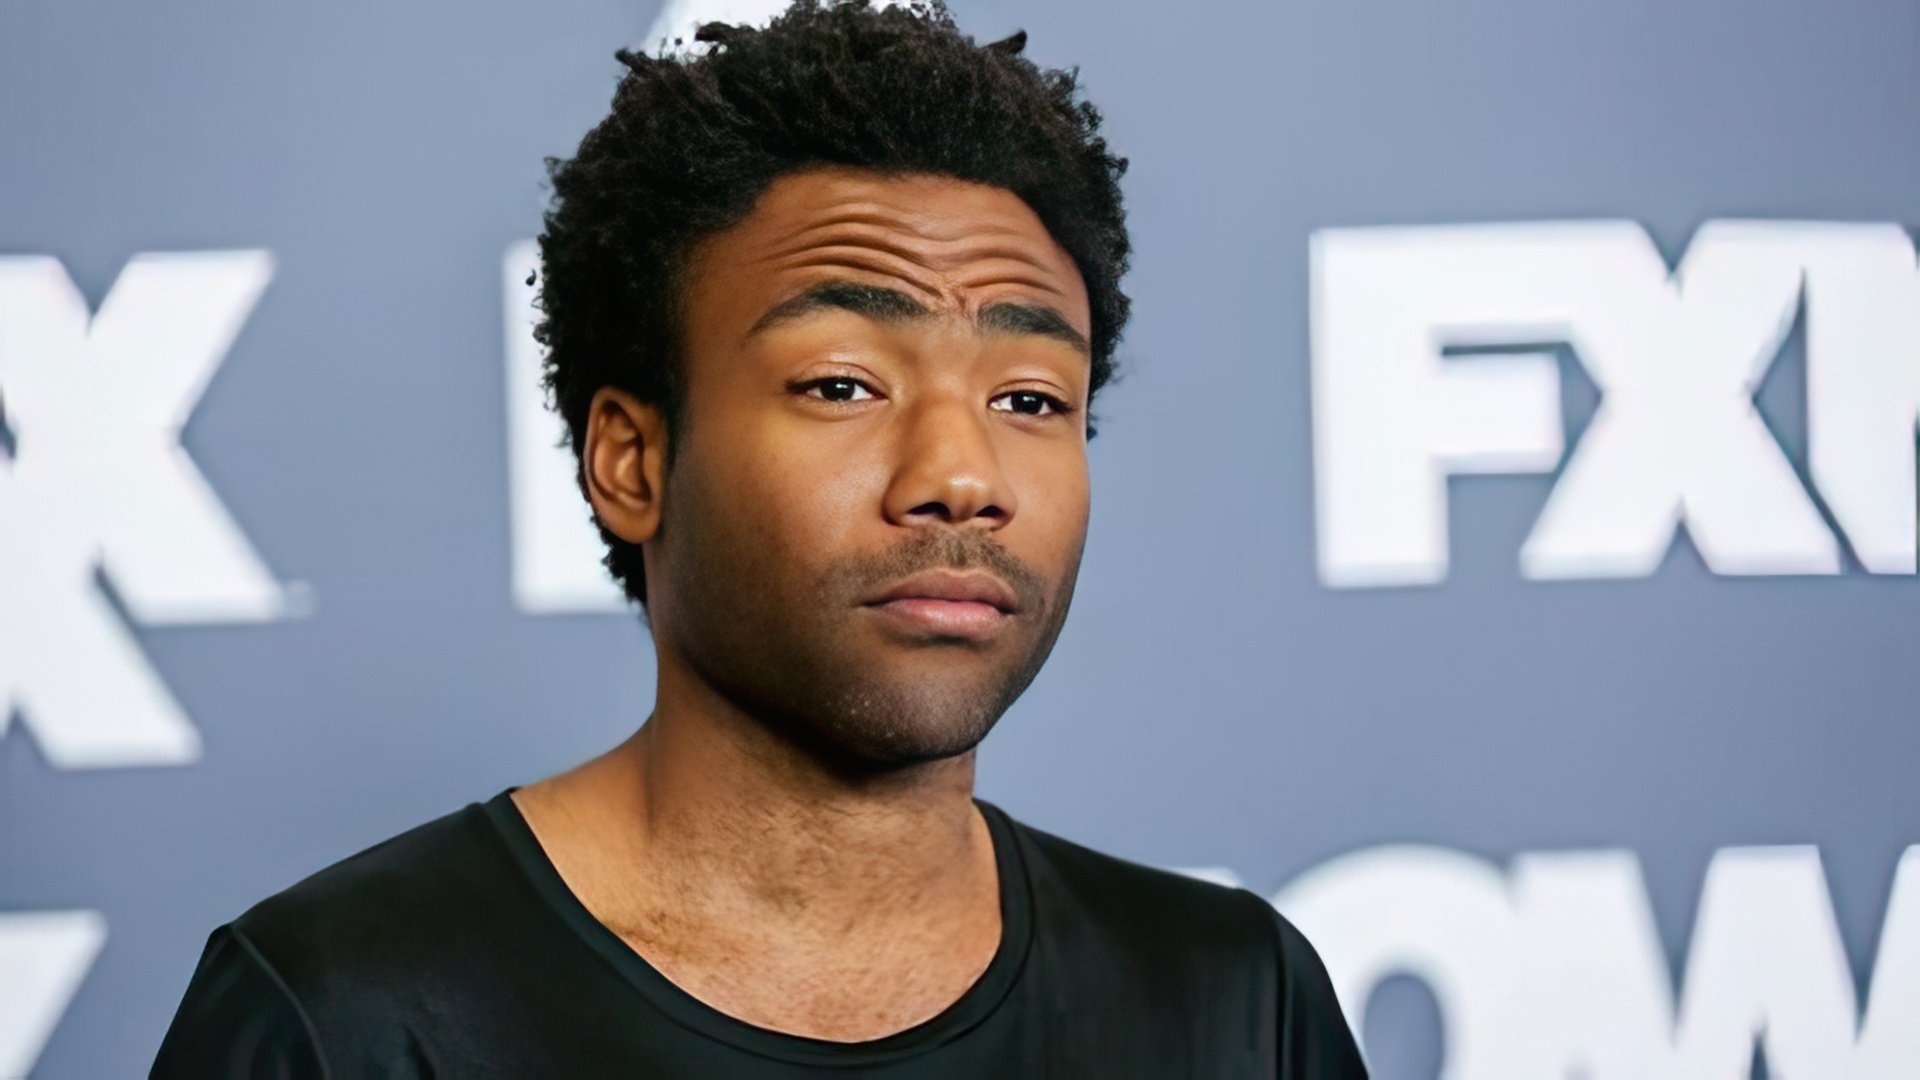 Actor, musician, comedian and producer Donald Glover